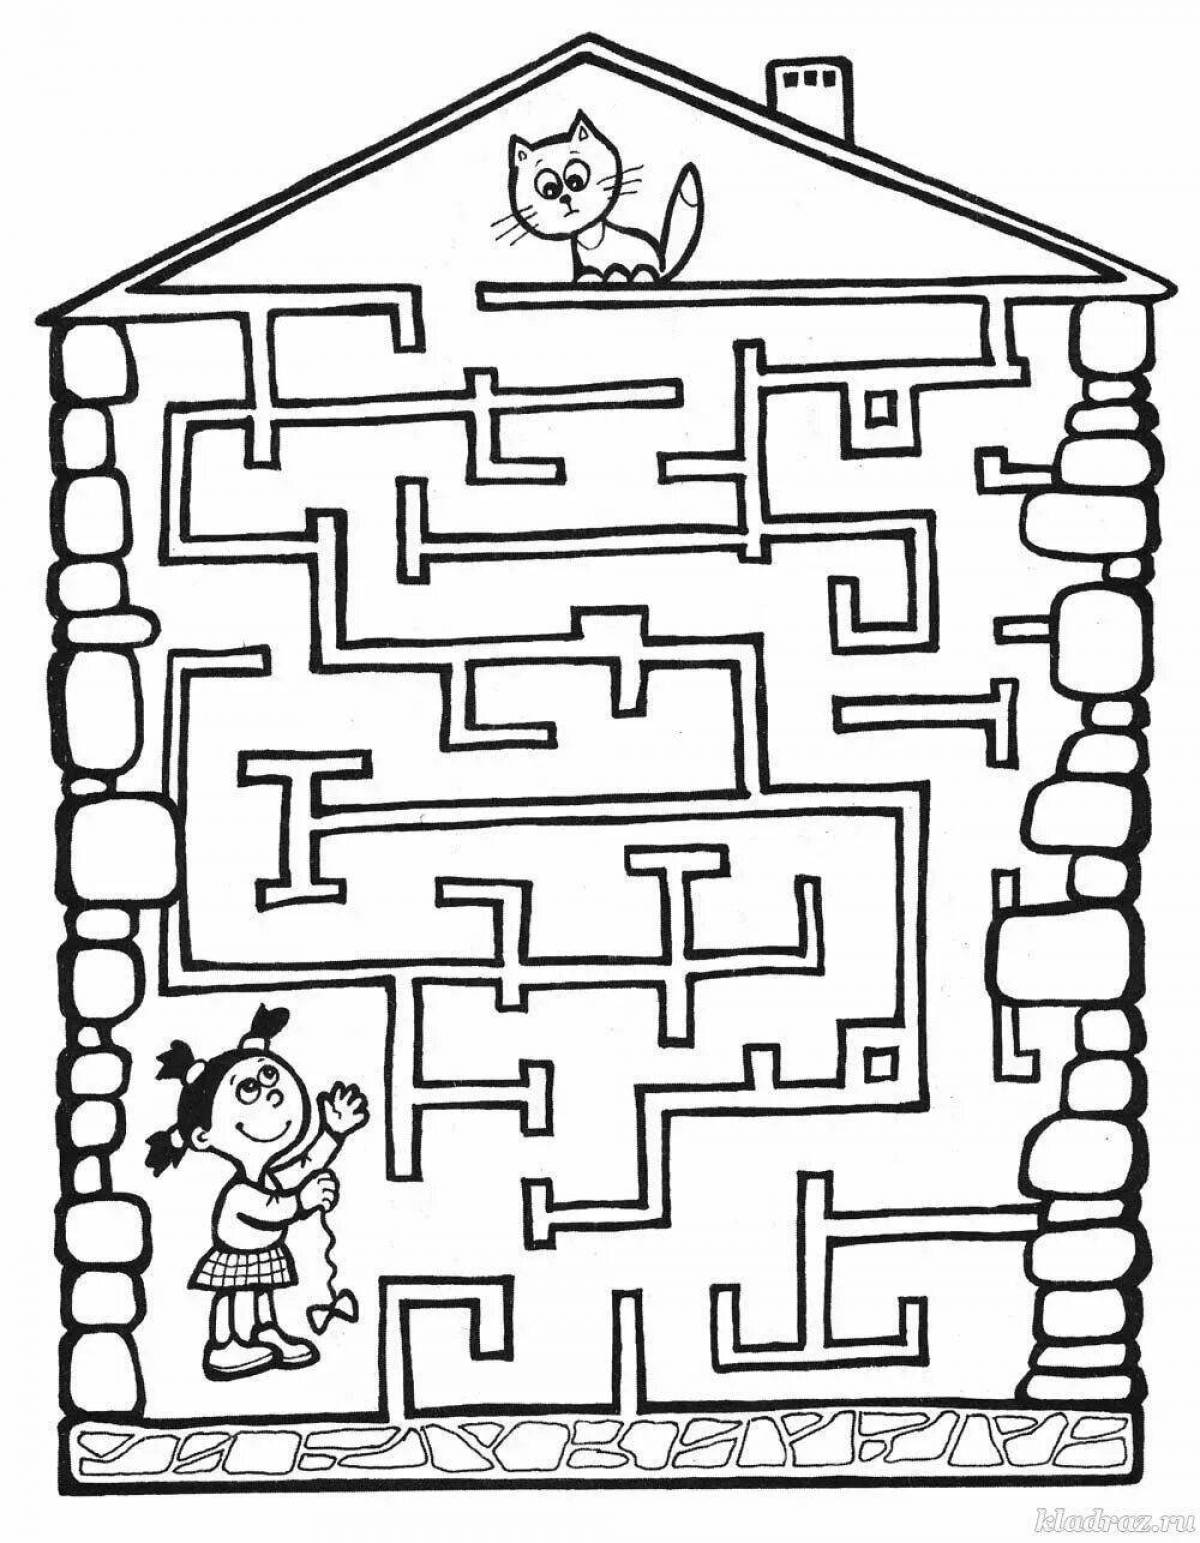 A tempting maze coloring book for 3-4 year olds